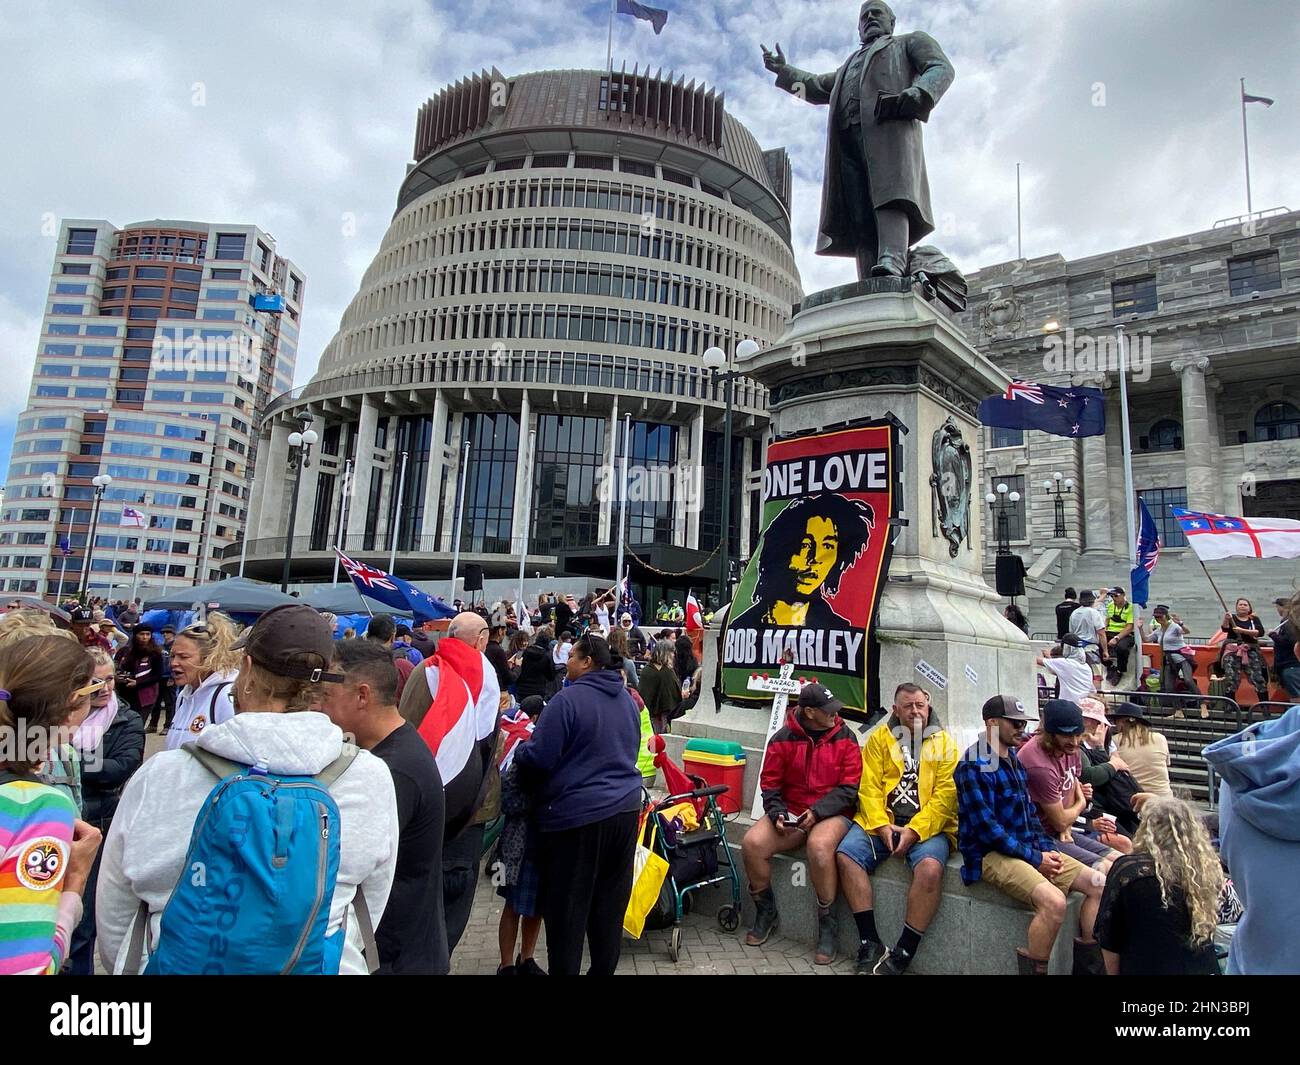 Protesters against the coronavirus disease (COVID-19) restrictions and vaccine mandates gather as they camp in front of the parliament in Wellington, New Zealand, February 14, 2022. REUTERS/Praveen Menon Stock Photo